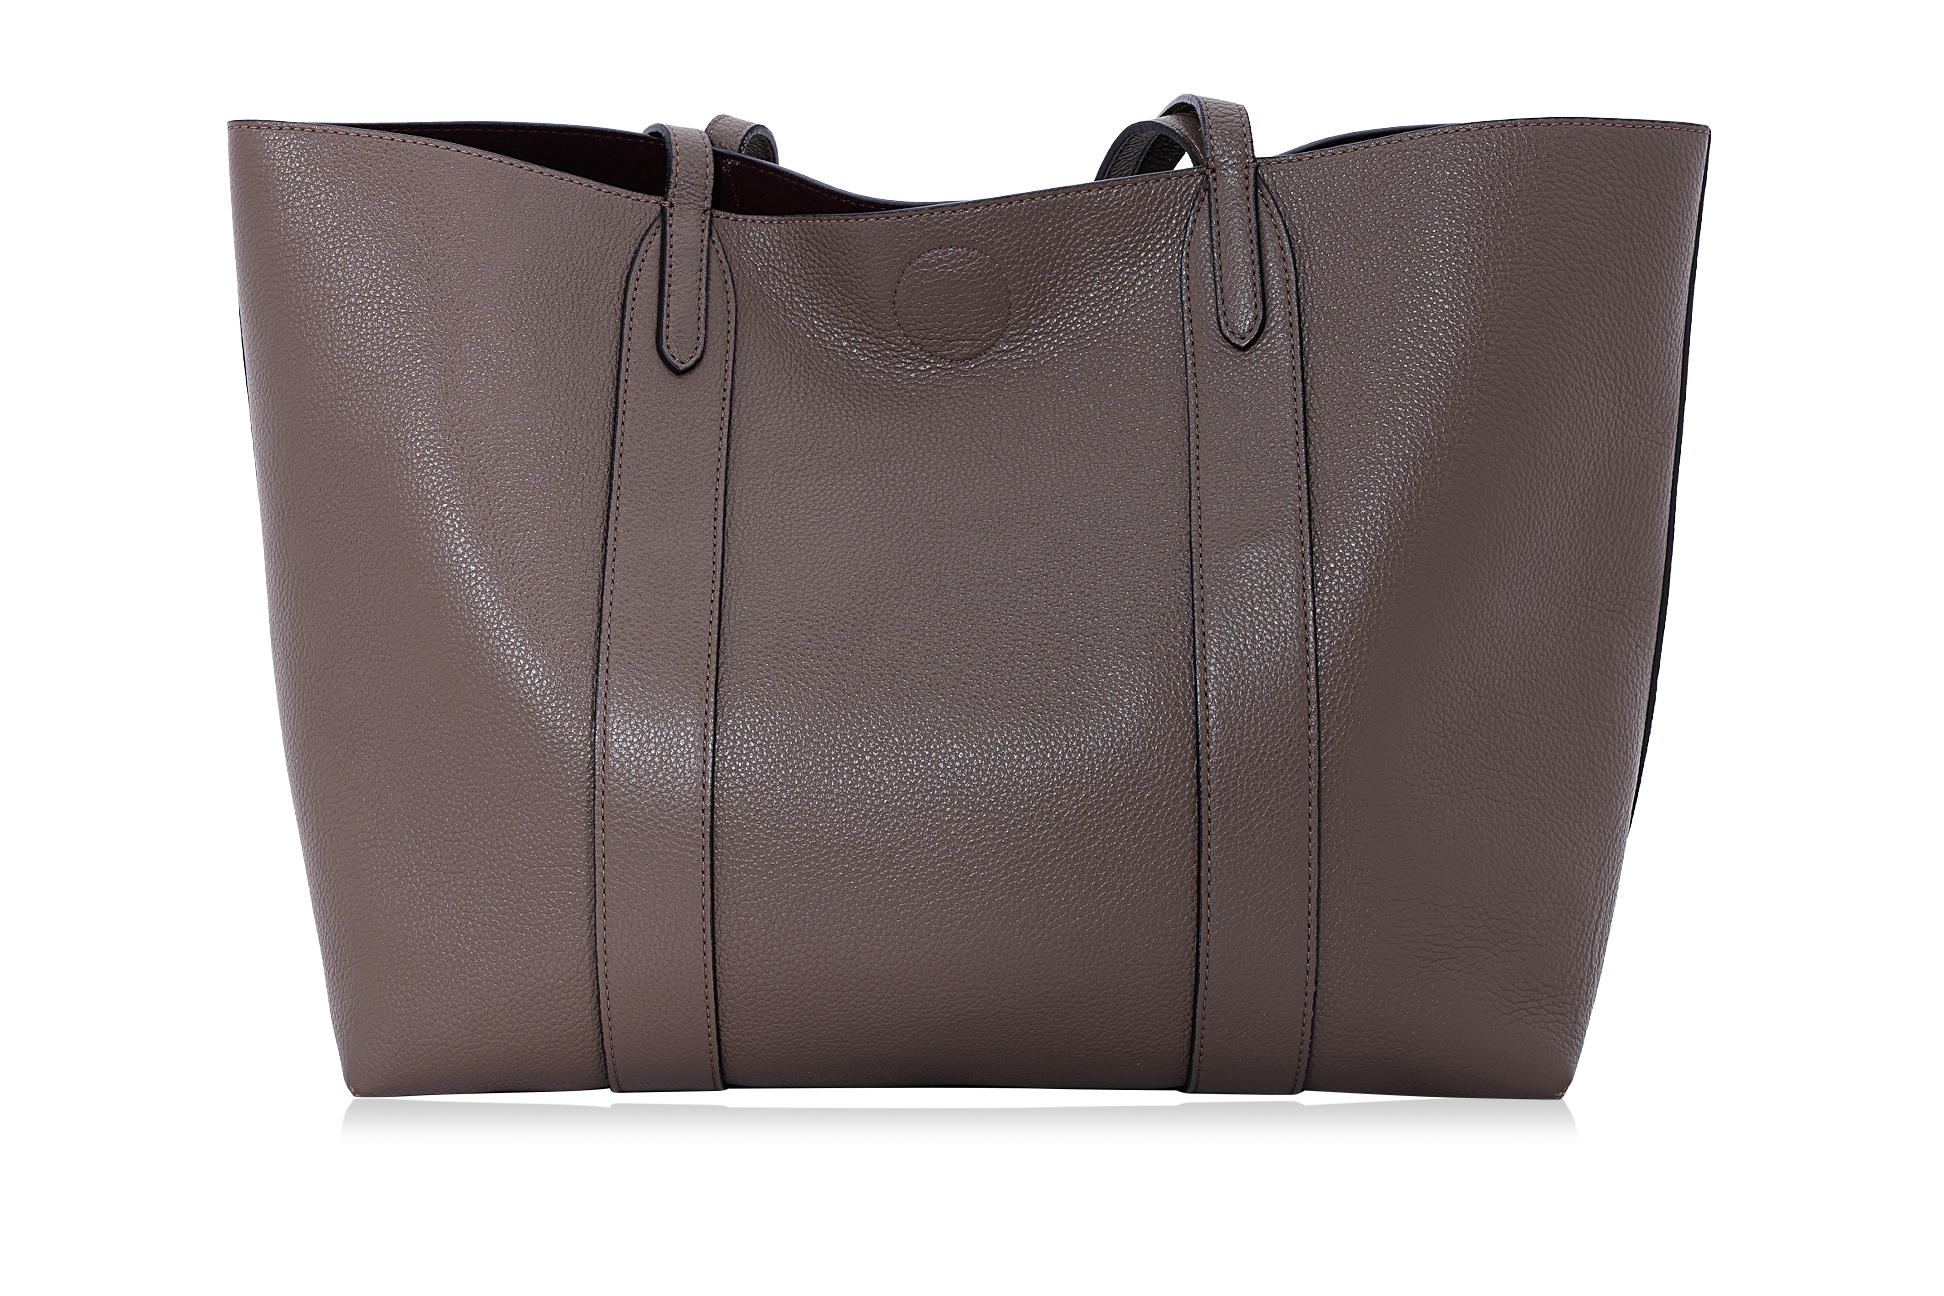 A MULBERRY BAYSWATER TOTE IN TAUPE - Image 2 of 5